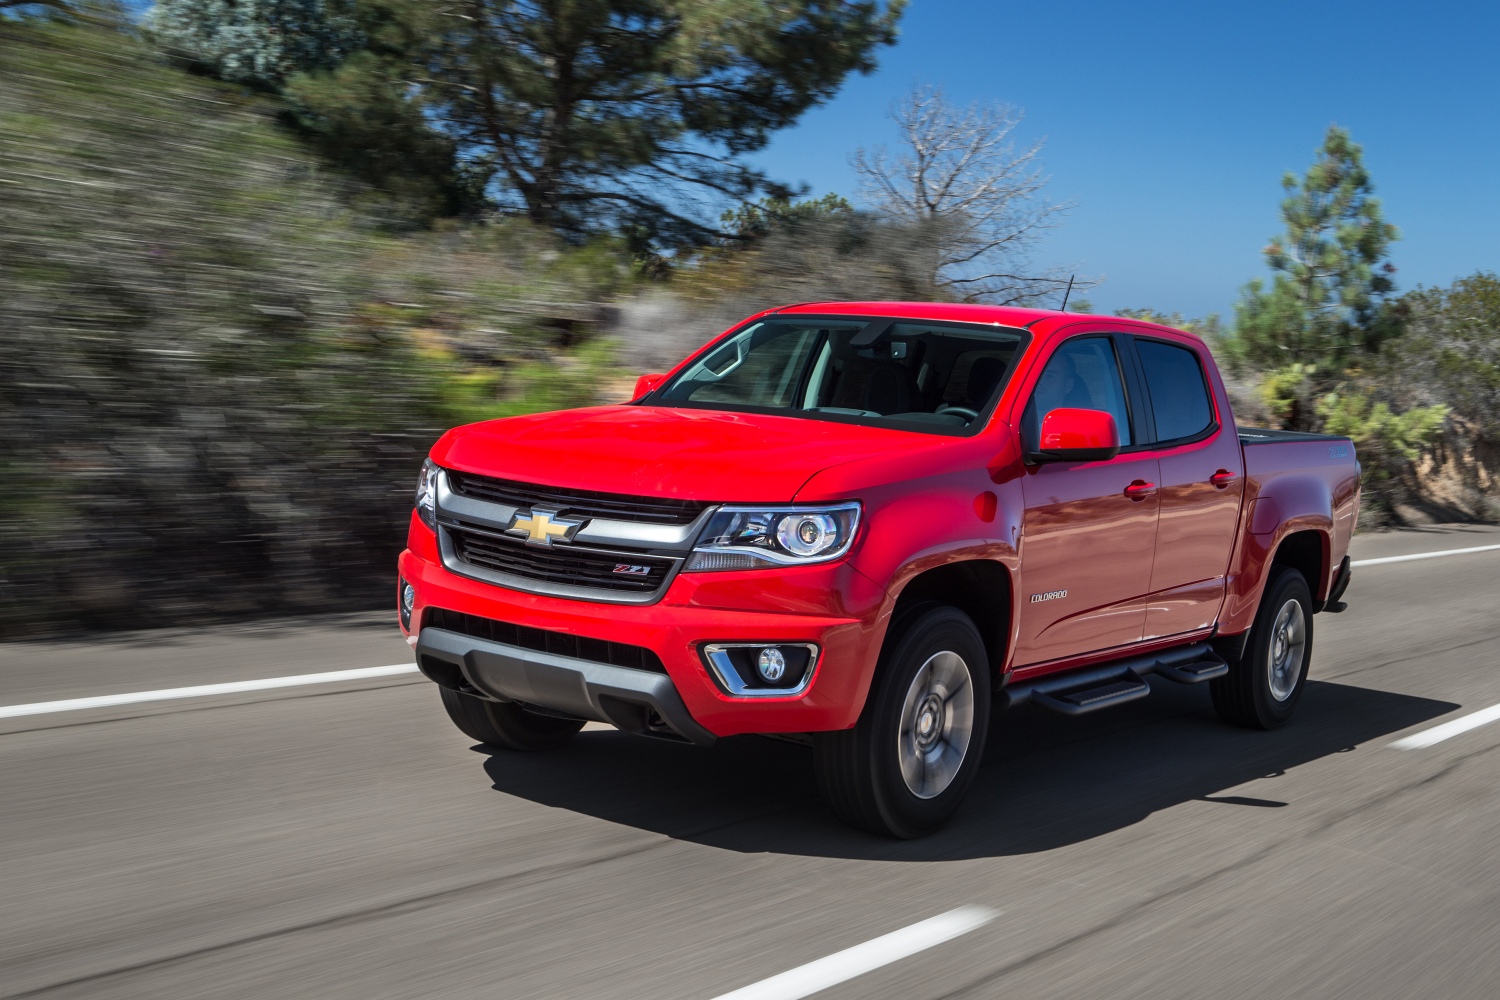 Least expensive pickup trucks from 2015 like the Chevrolet Colorado